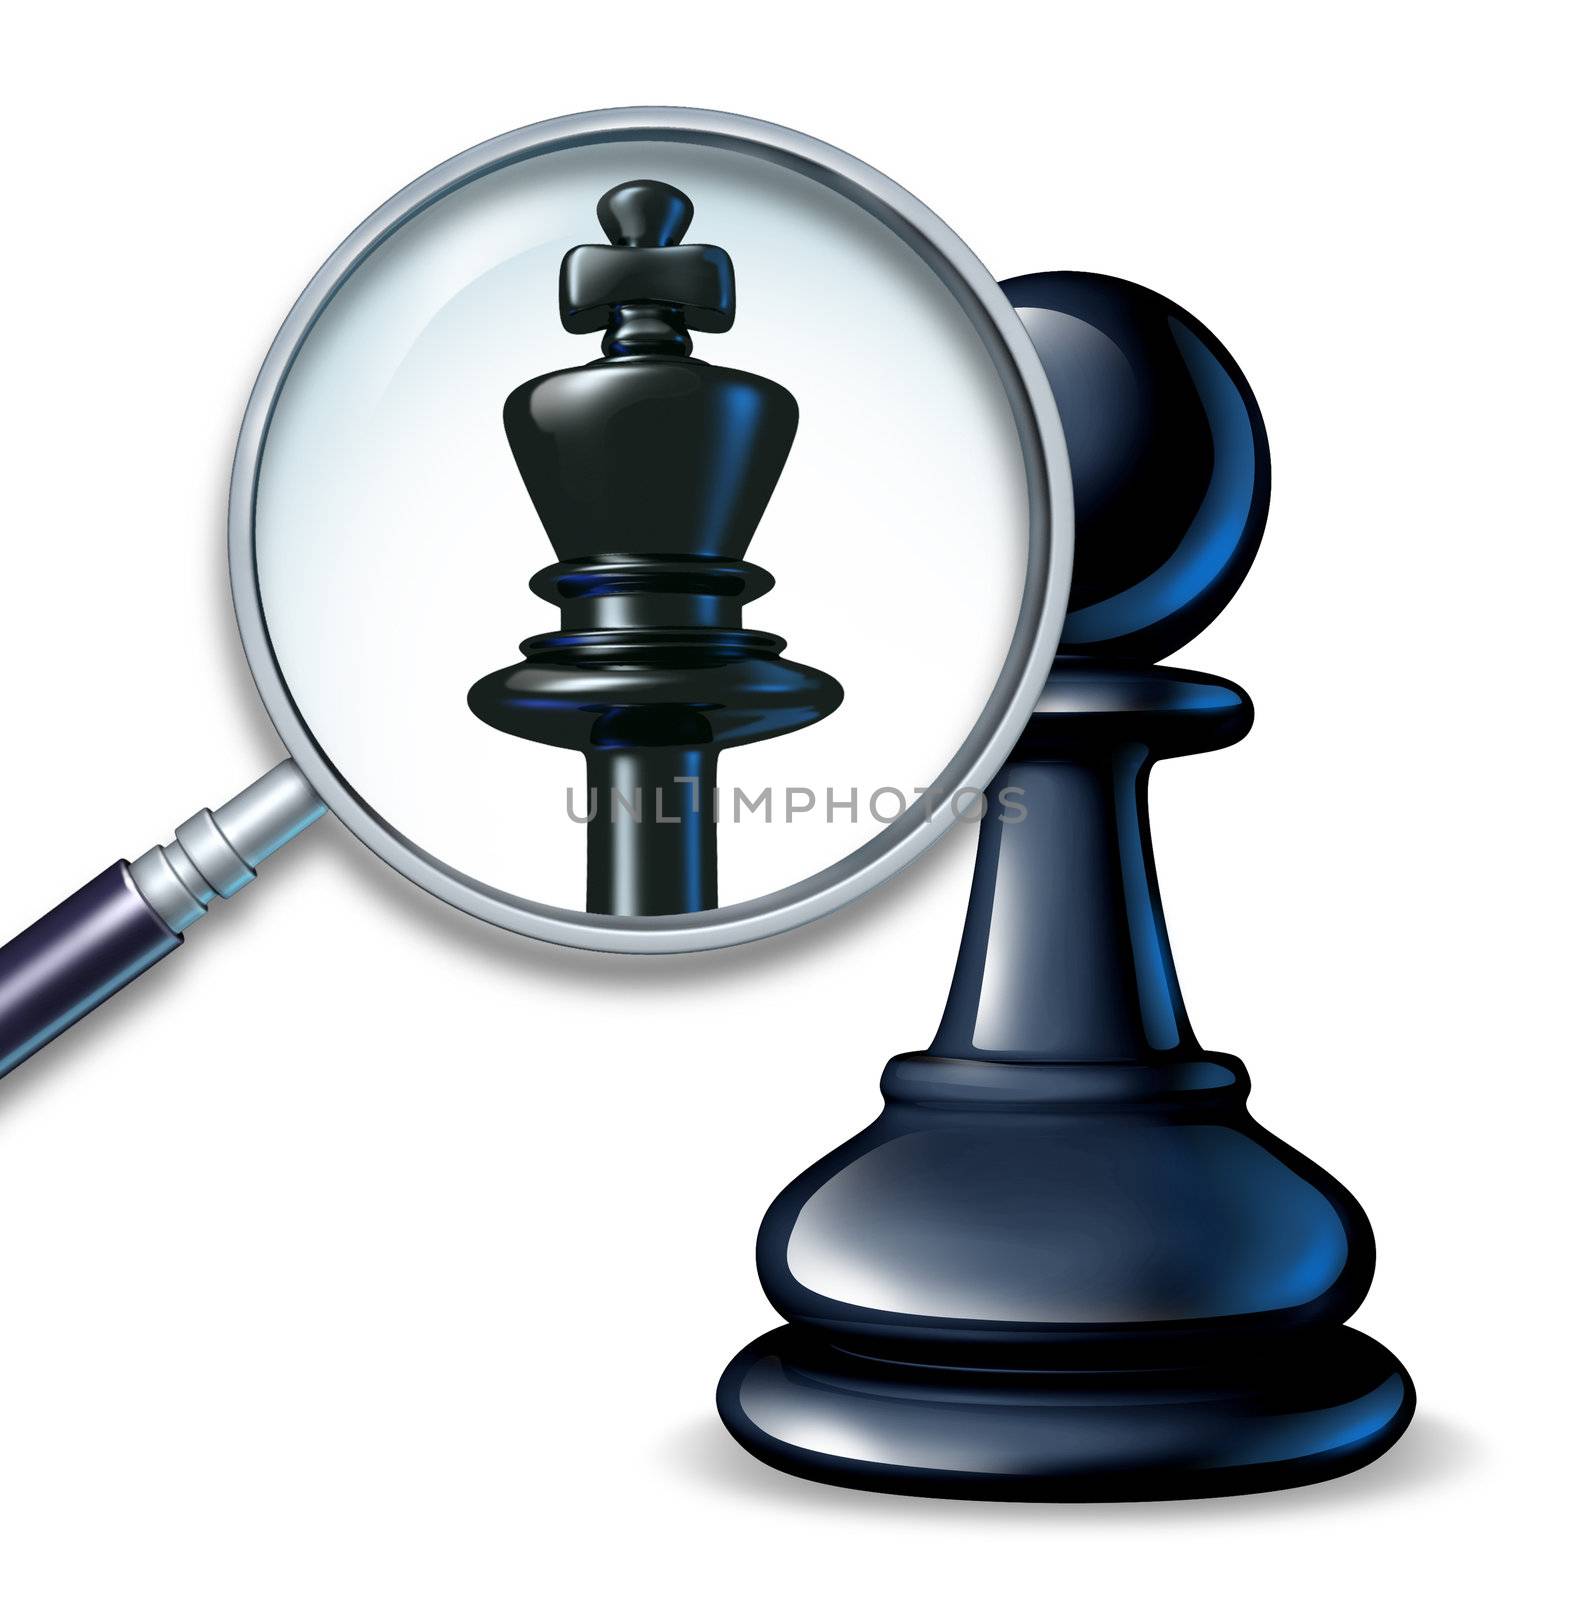 Future leader business concept with a chess game pawn and a magnifying glass showing a change to a king figure as a symbol of a rise to success and career promotion for greatness.